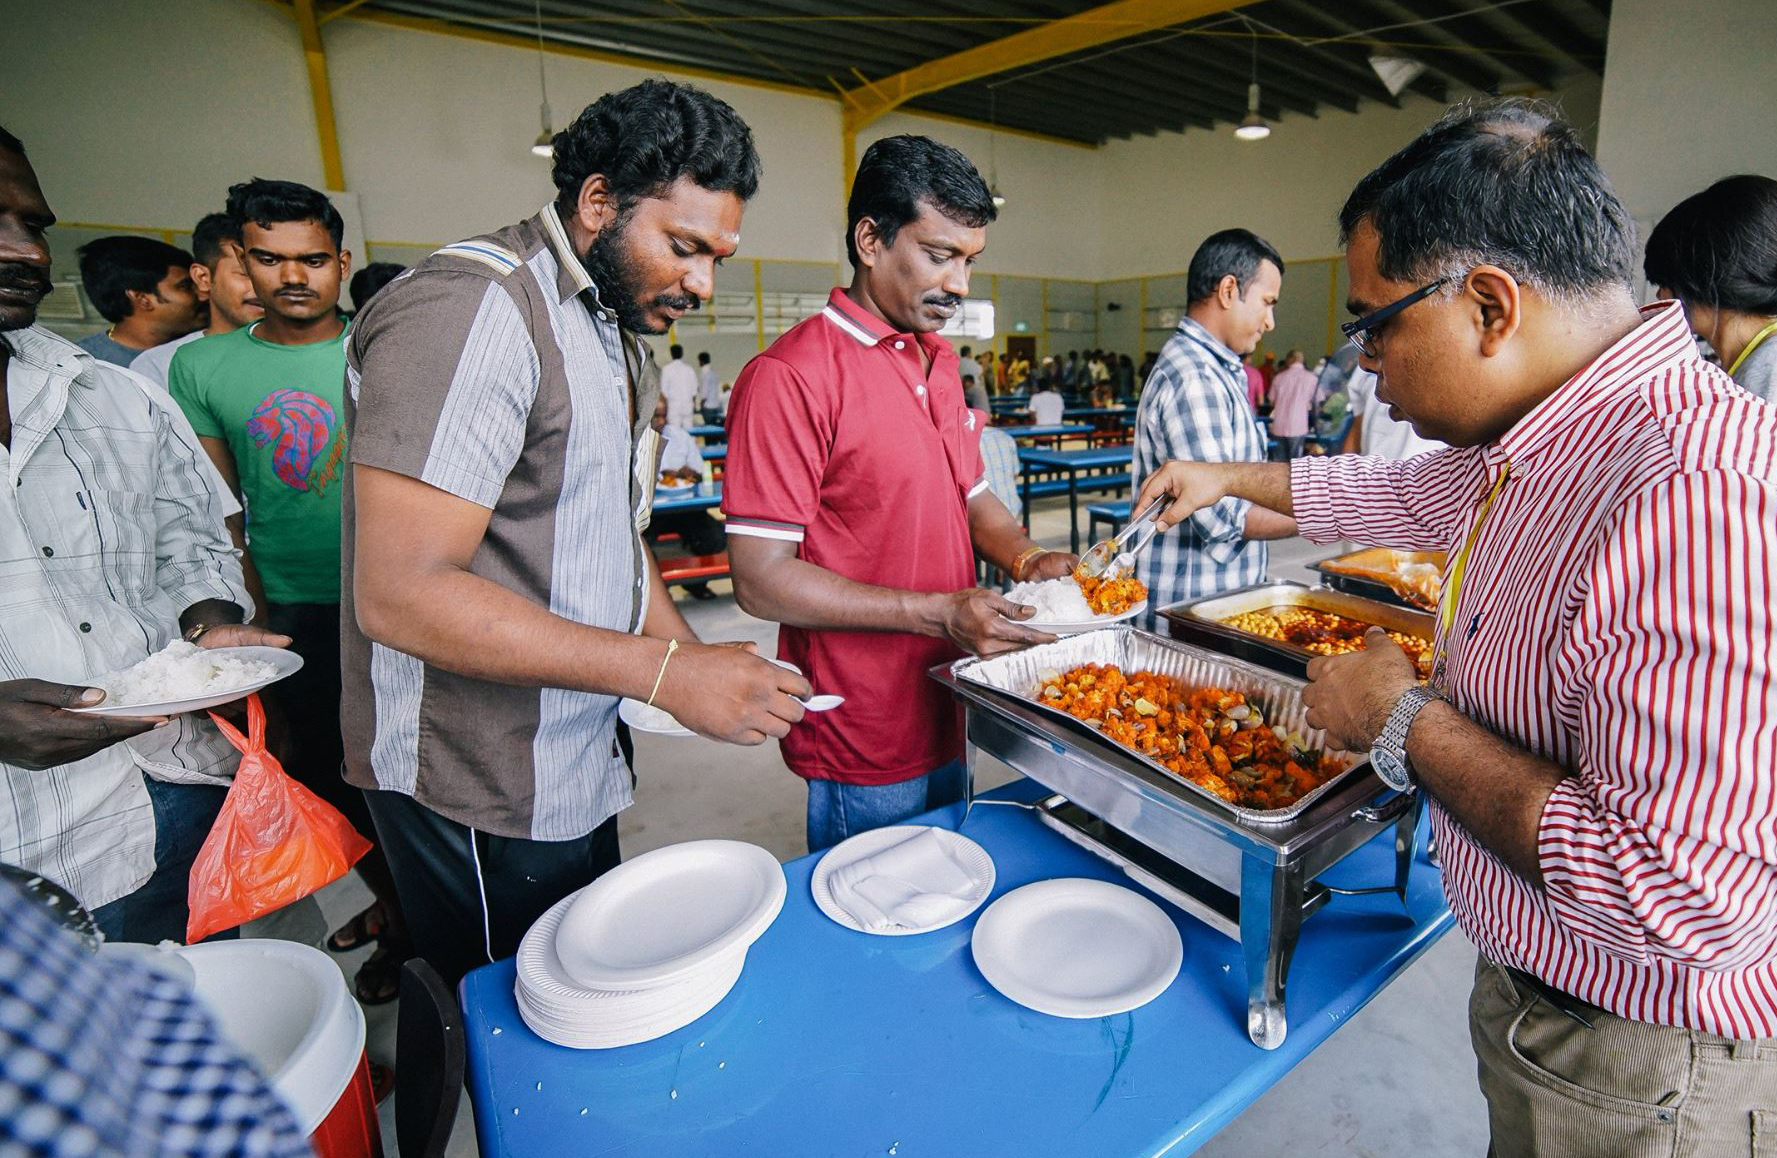 Fortifying Meals for Social Good